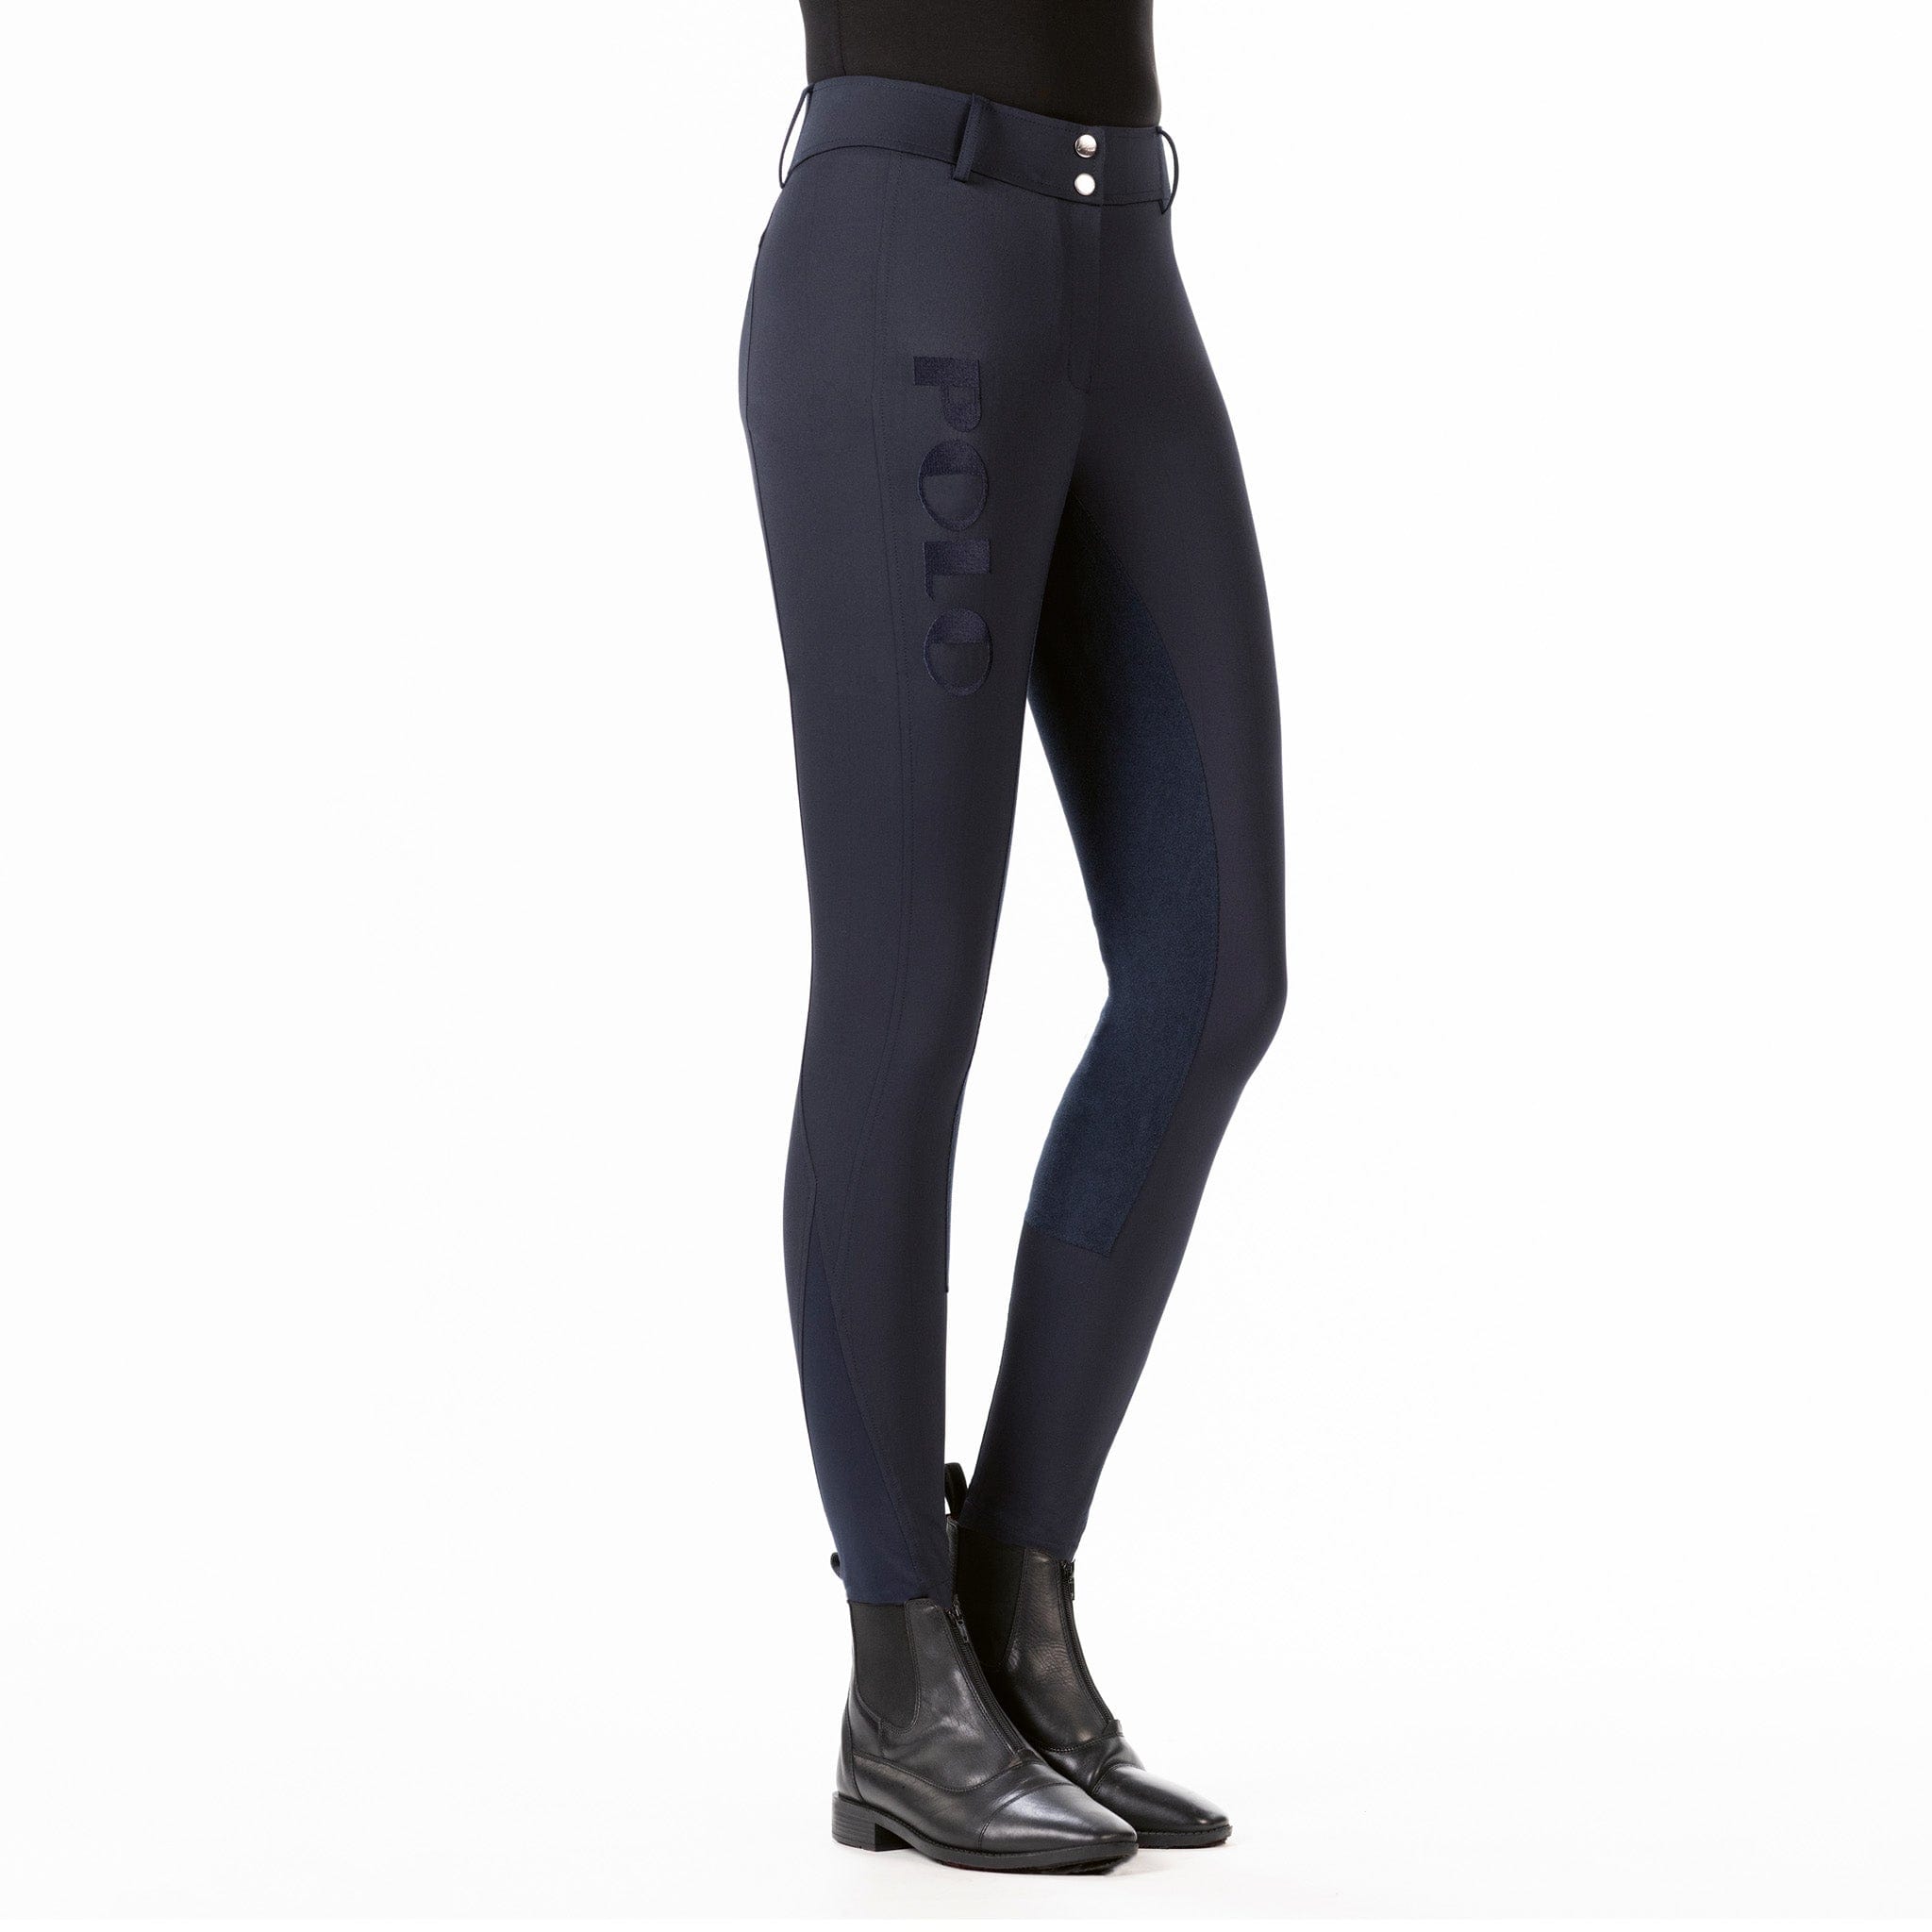 HKM Buenos Aires Alos Full Seat Breeches 13124 Navy Front View On Model